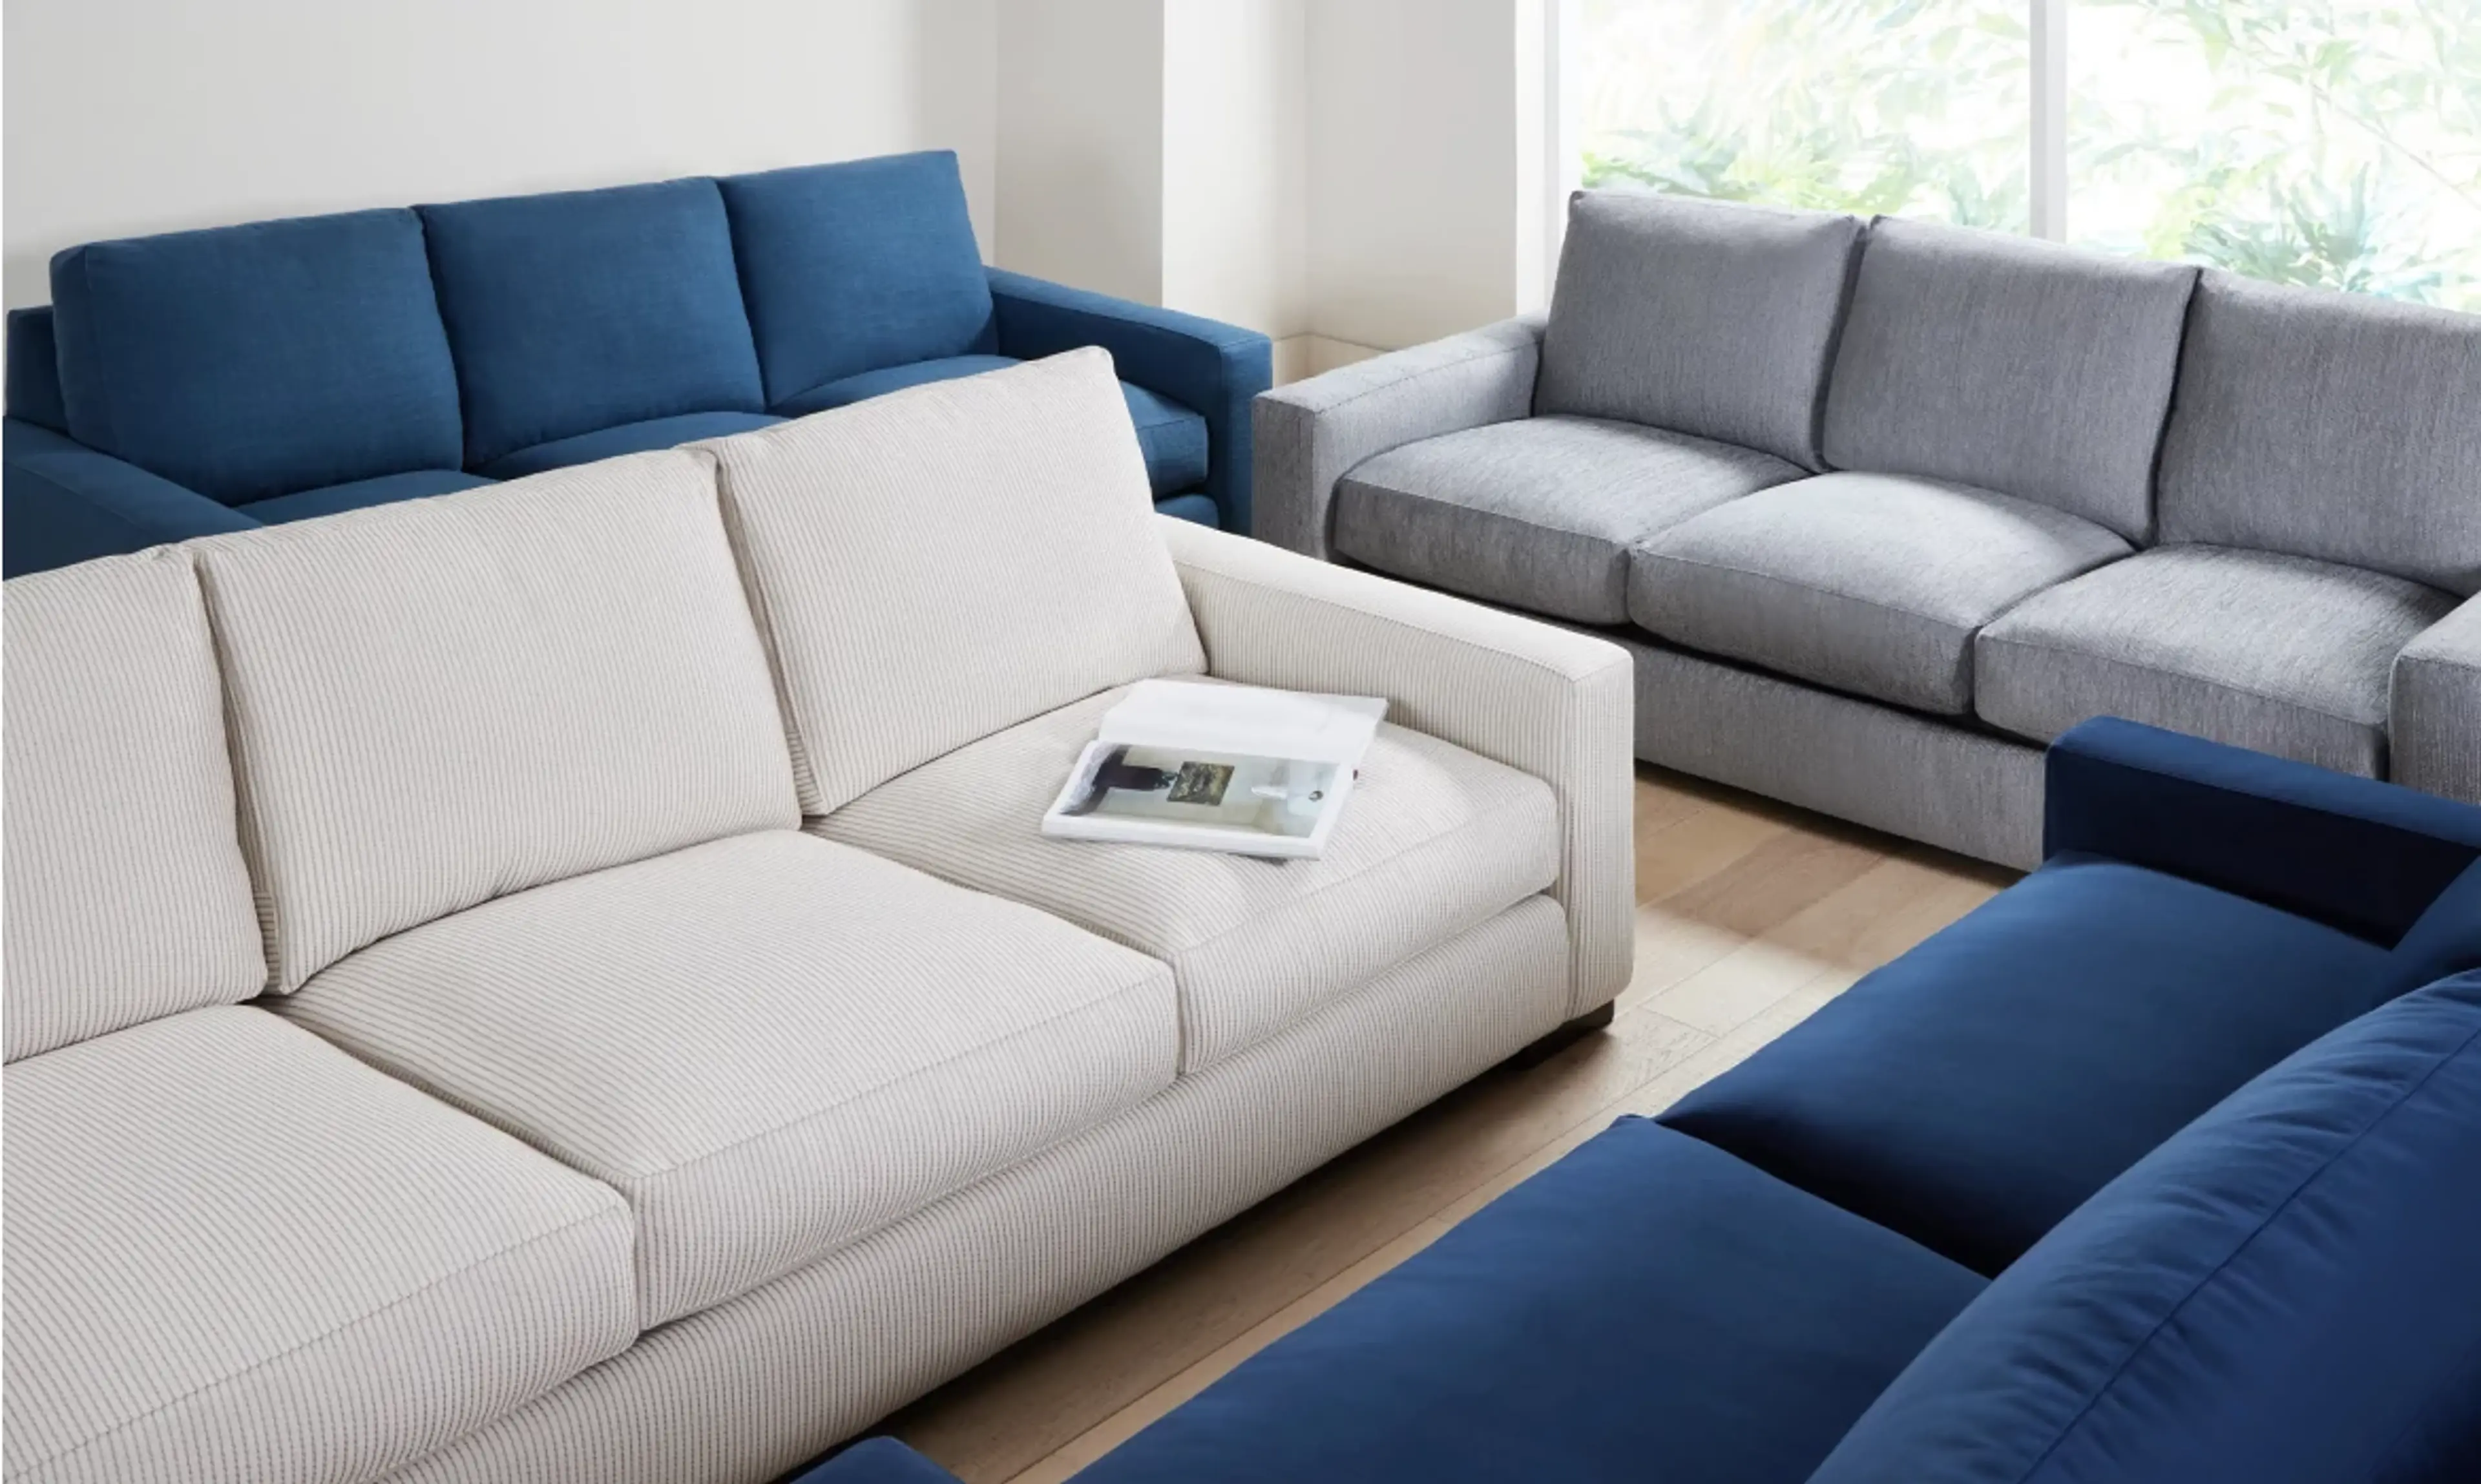 Design your own sectional